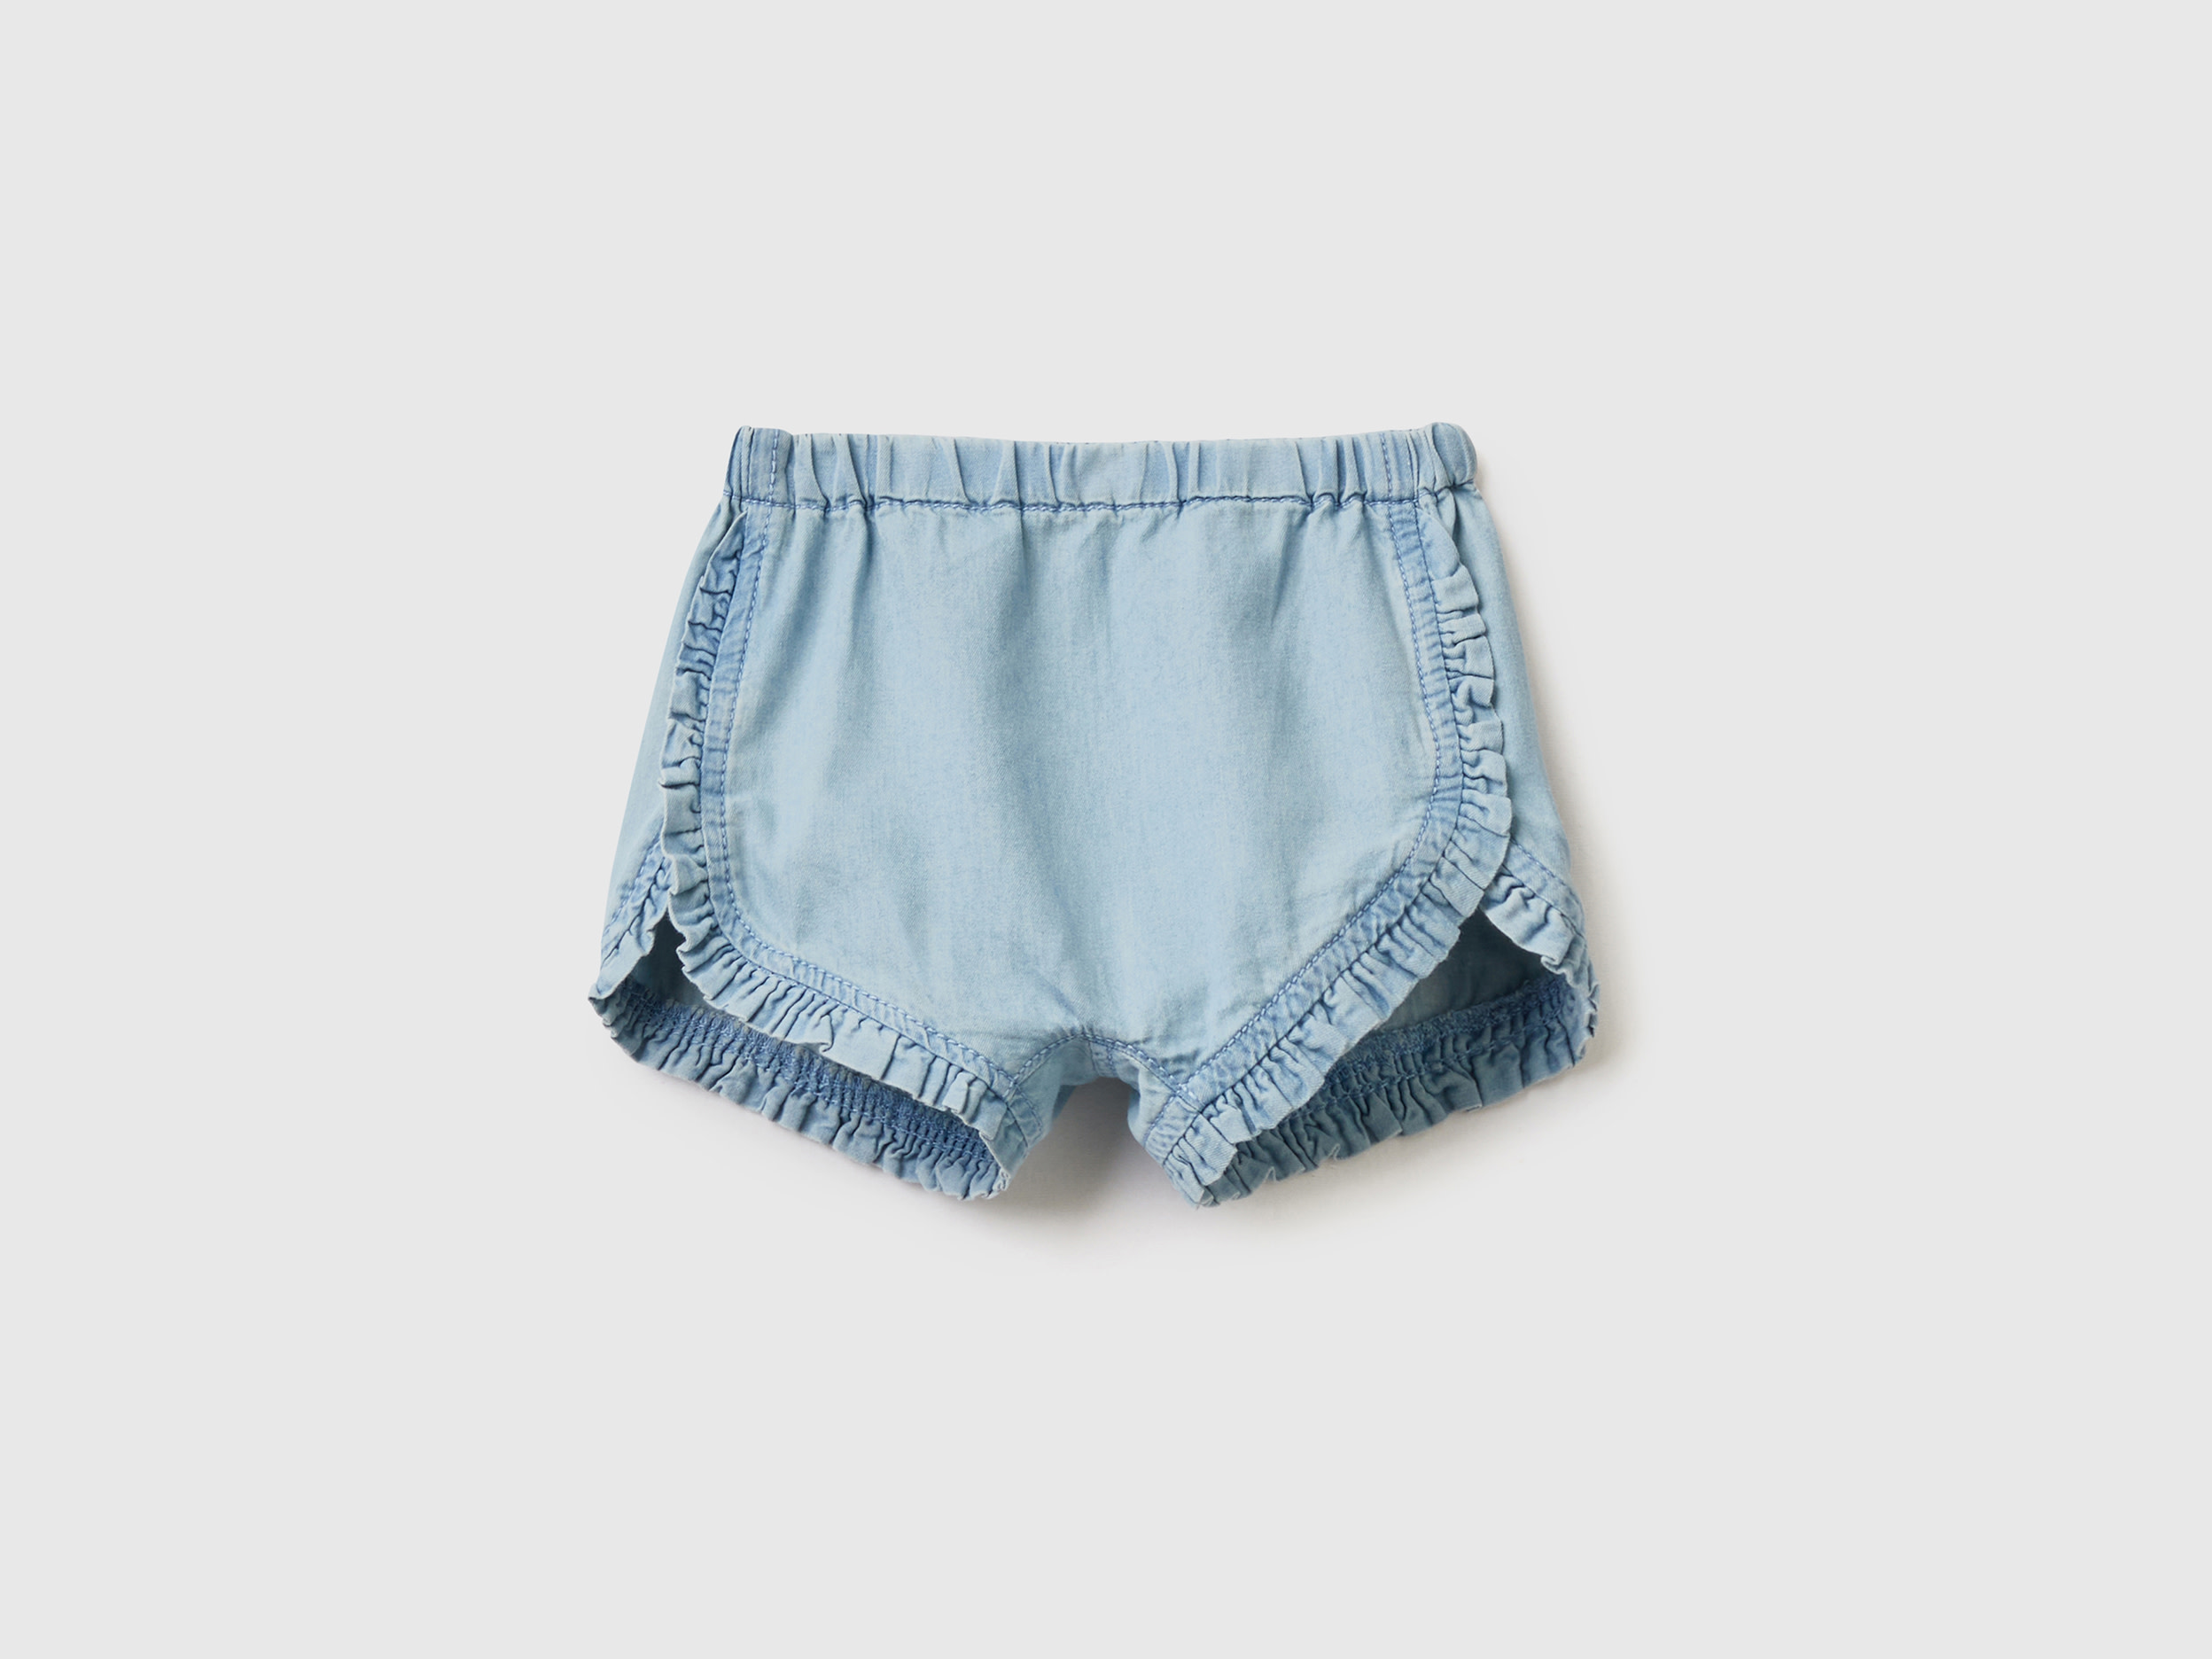 Benetton, Shorts With Rouches, size 3-6, Sky Blue, Kids